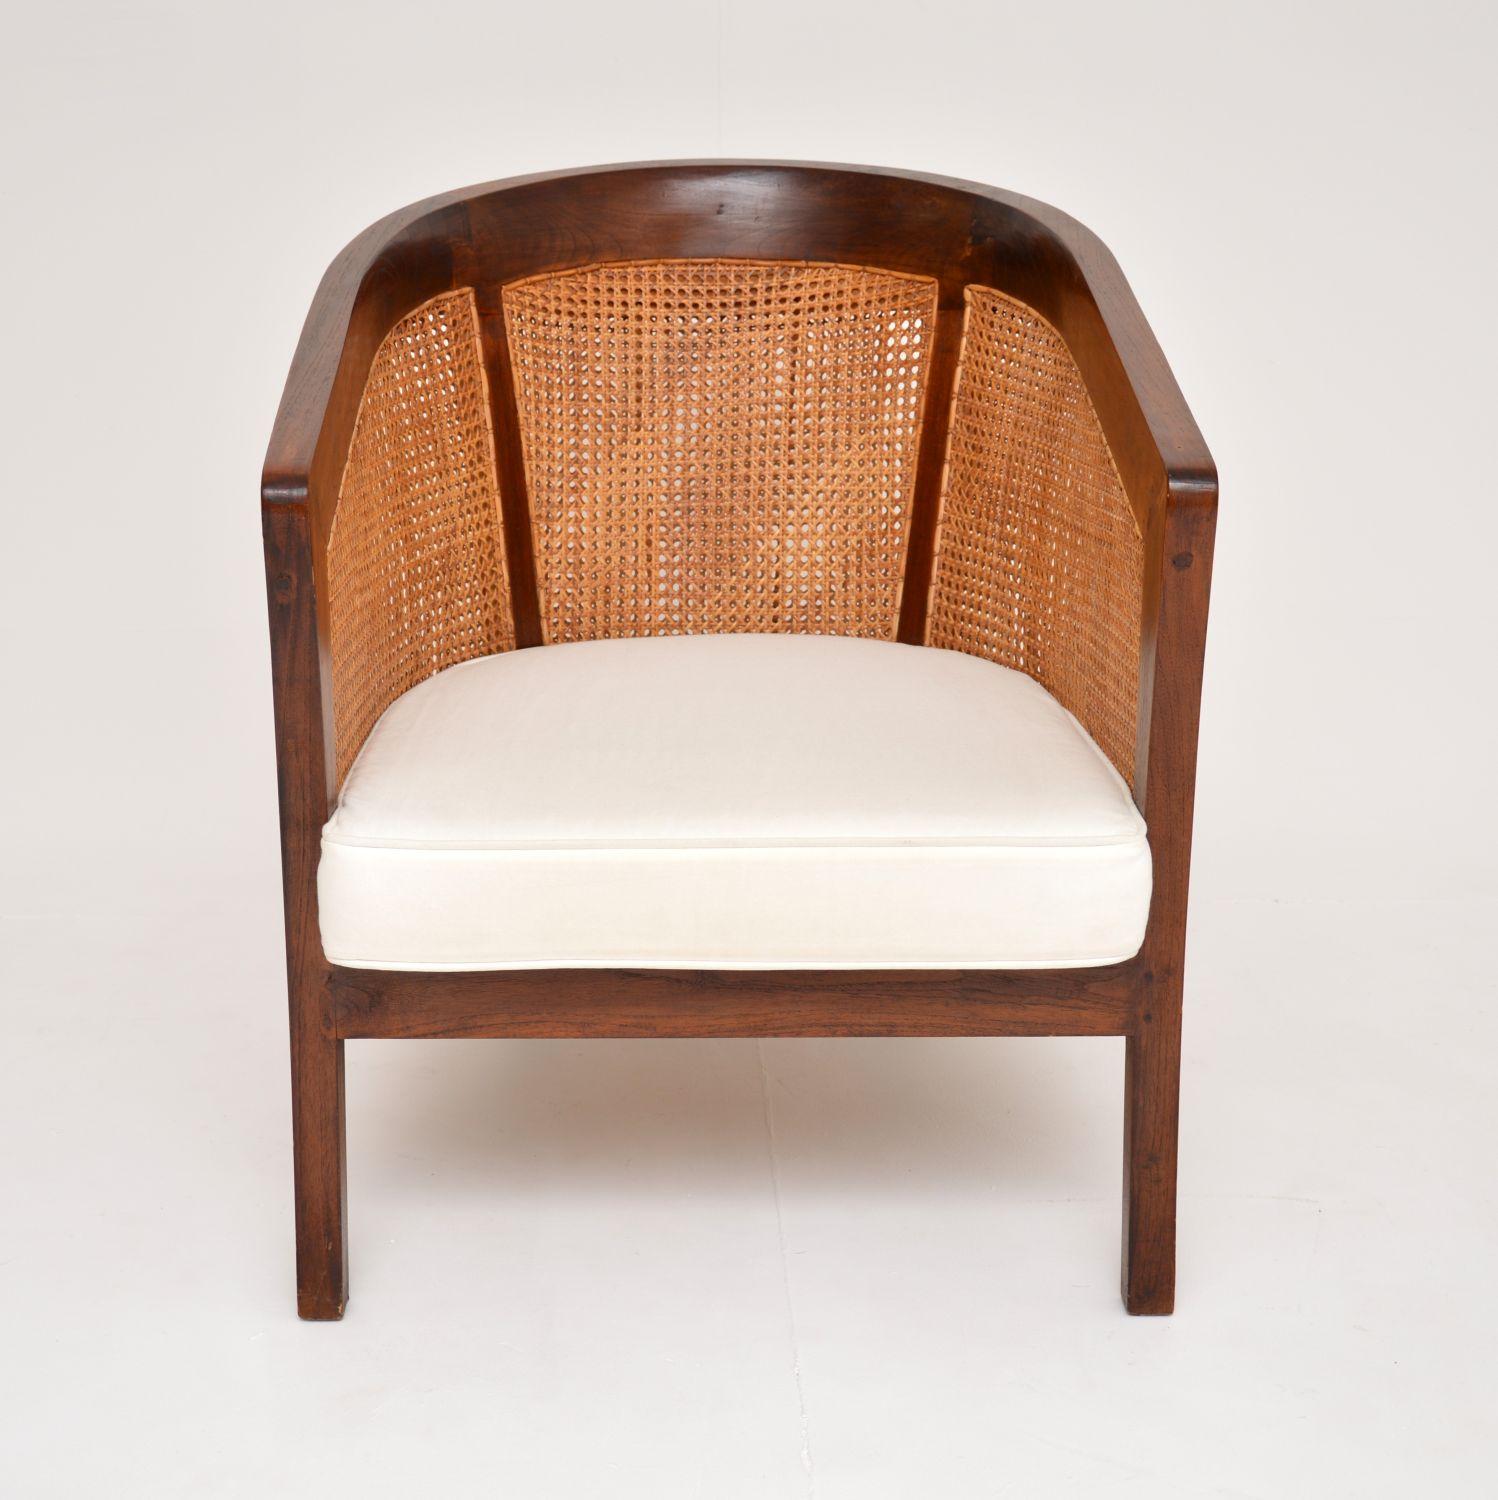 A beautiful antique colonial style armchair in solid teak. This was possibly made in southern or east Asia, it dates from around the 1950-60’s.

The quality is amazing, with a beautifully sculpted frame with fine cane rattan on the seat and all